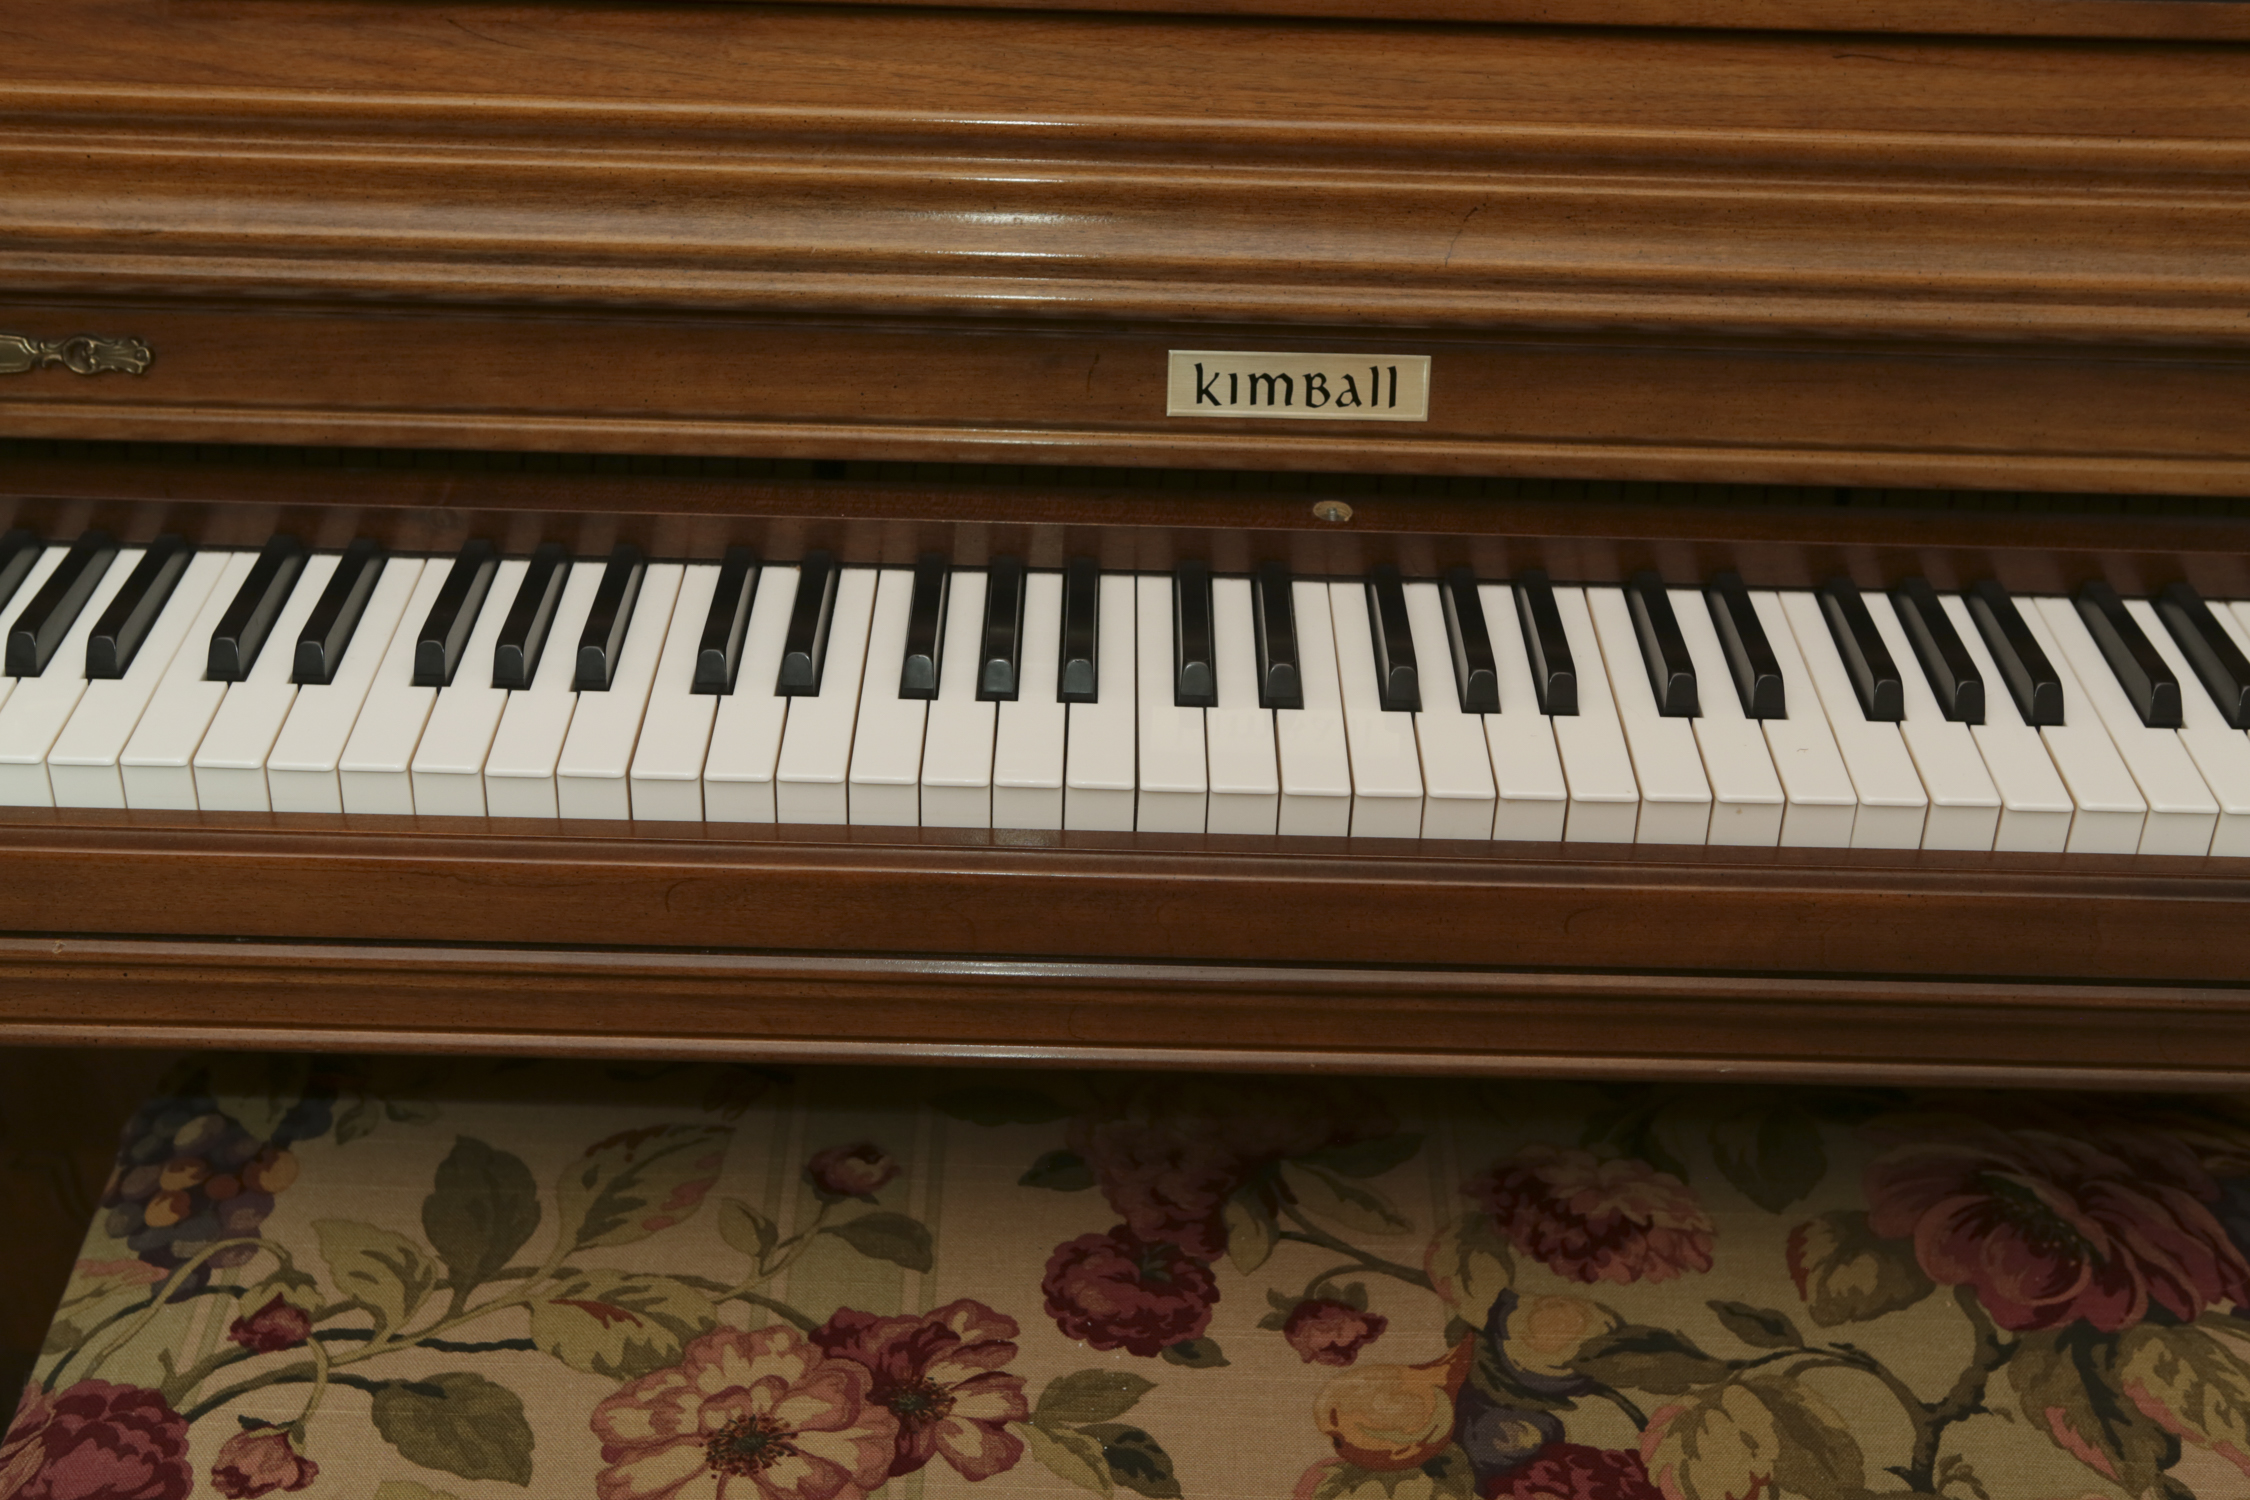 kimball upright piano serial number